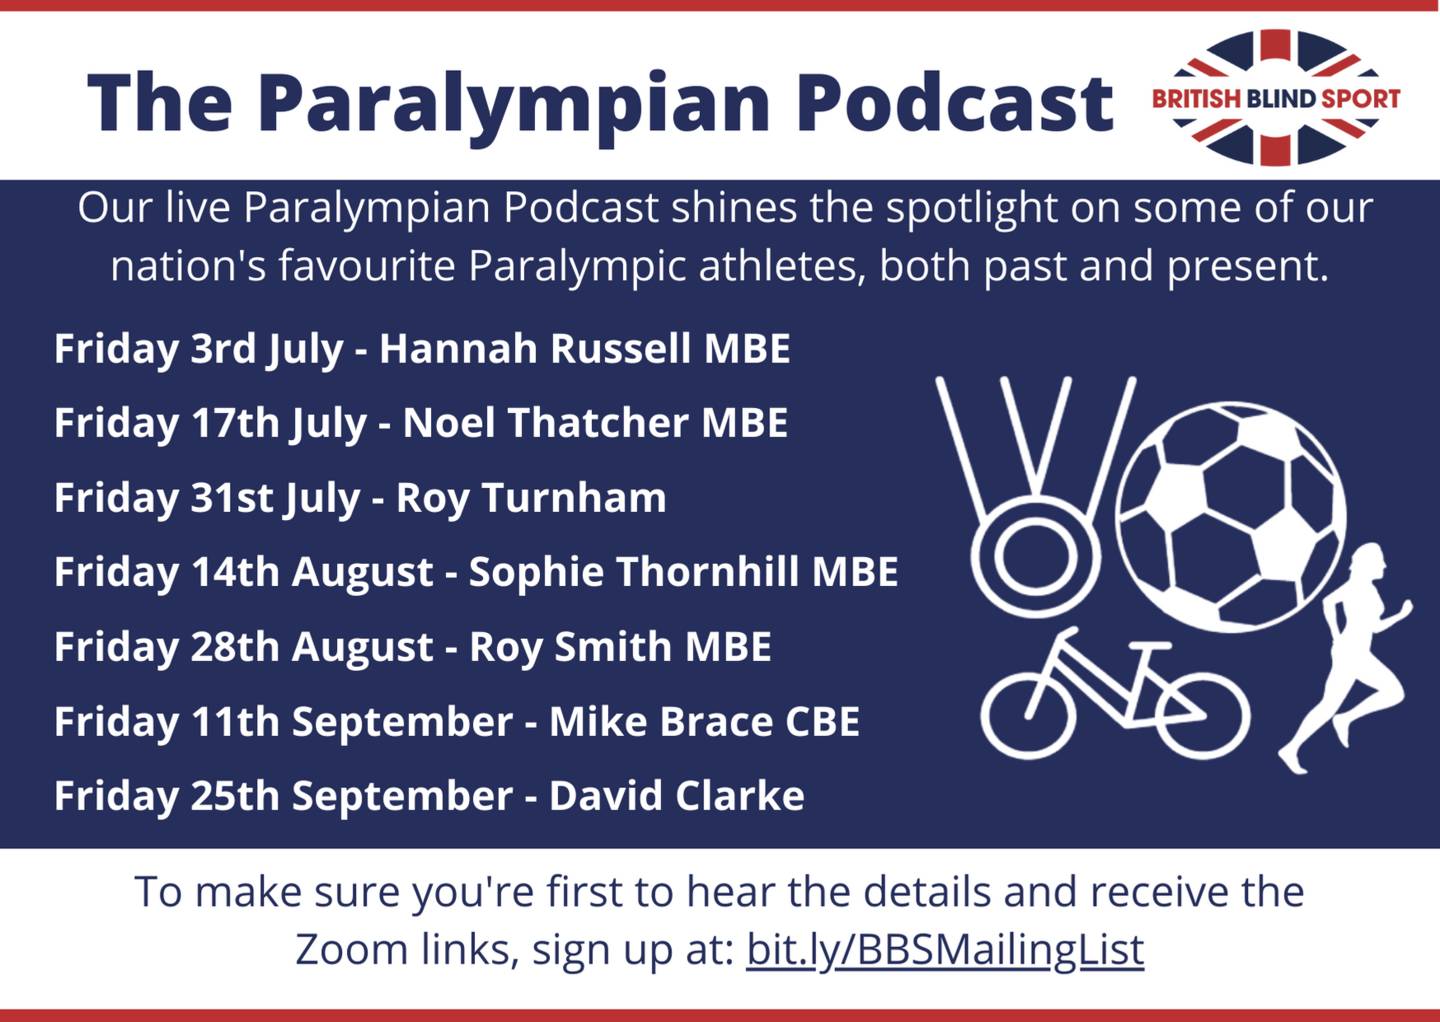 Image shows dates of British Blind Sport's Paralympic Podcast series 